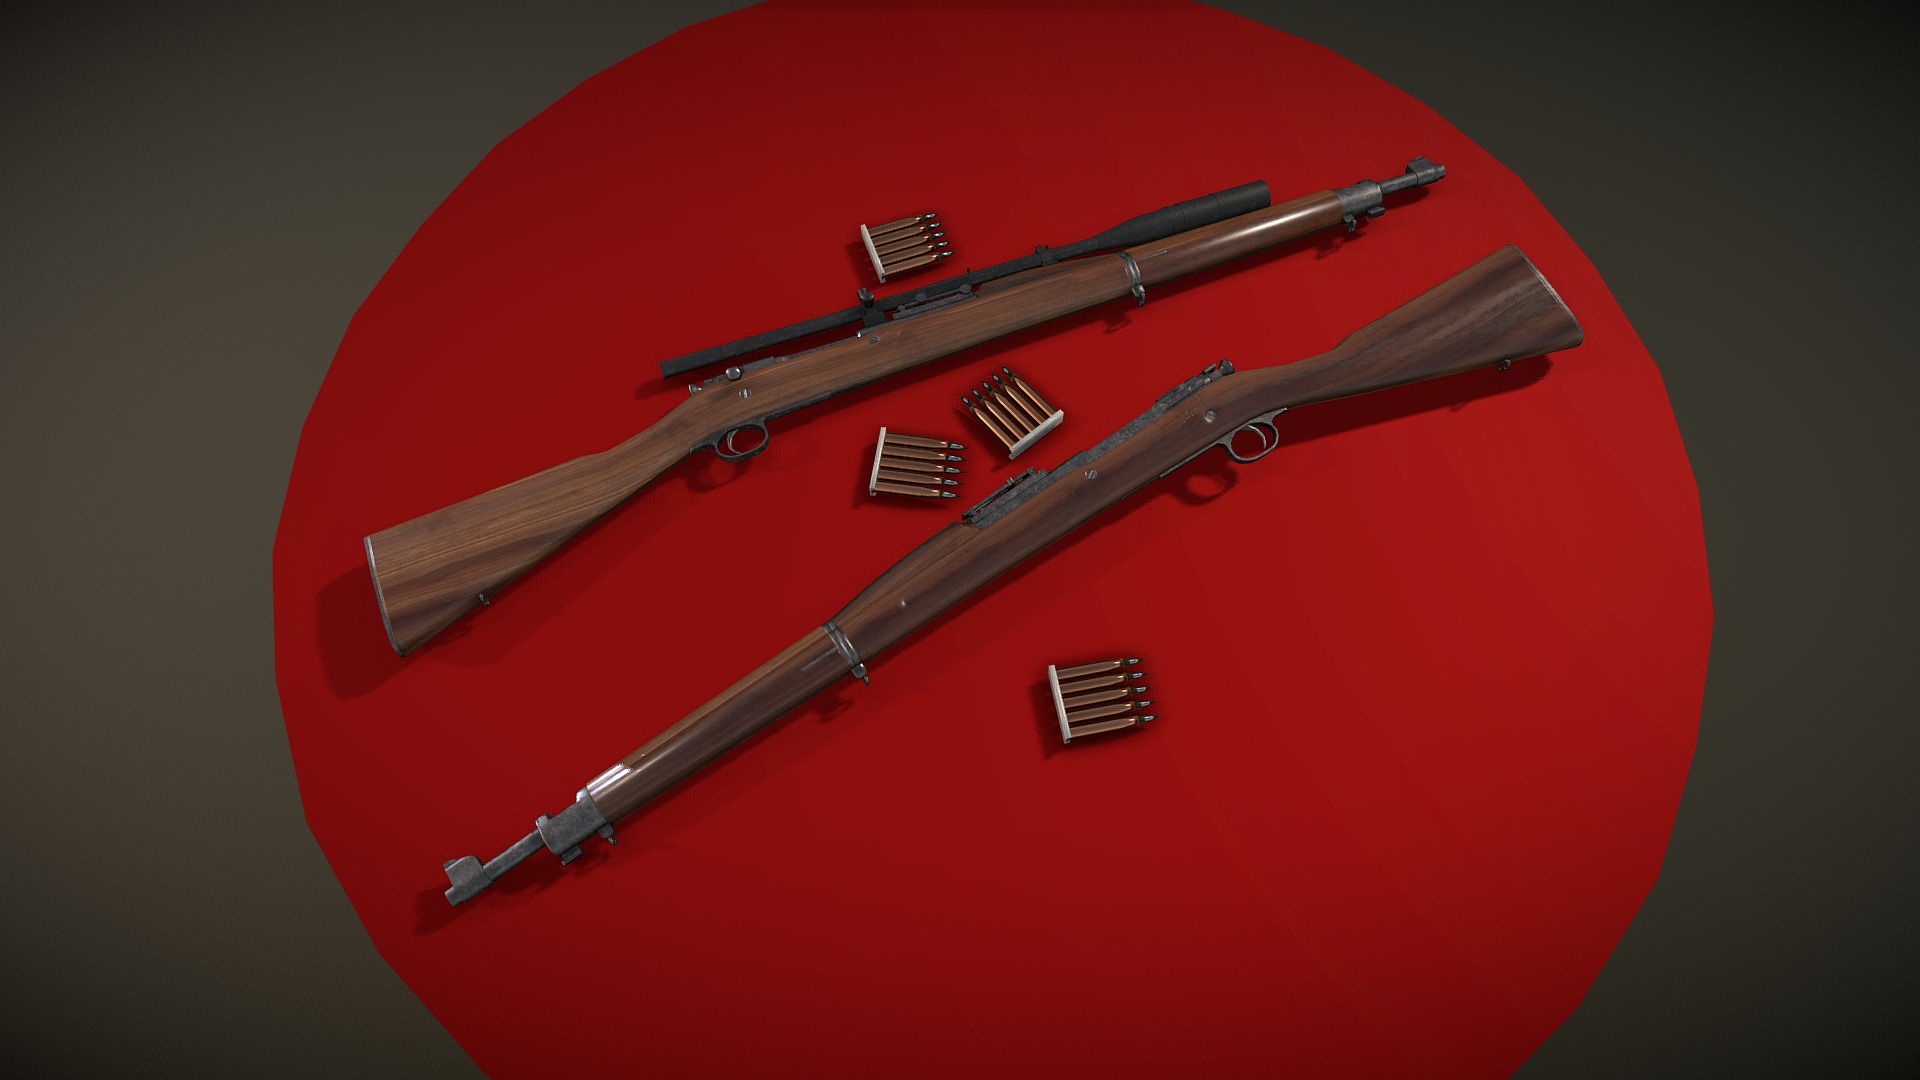 3D model M1903 Springfield rifle - This is a 3D model of the M1903 Springfield rifle. The 3D model is about a red and black gun.